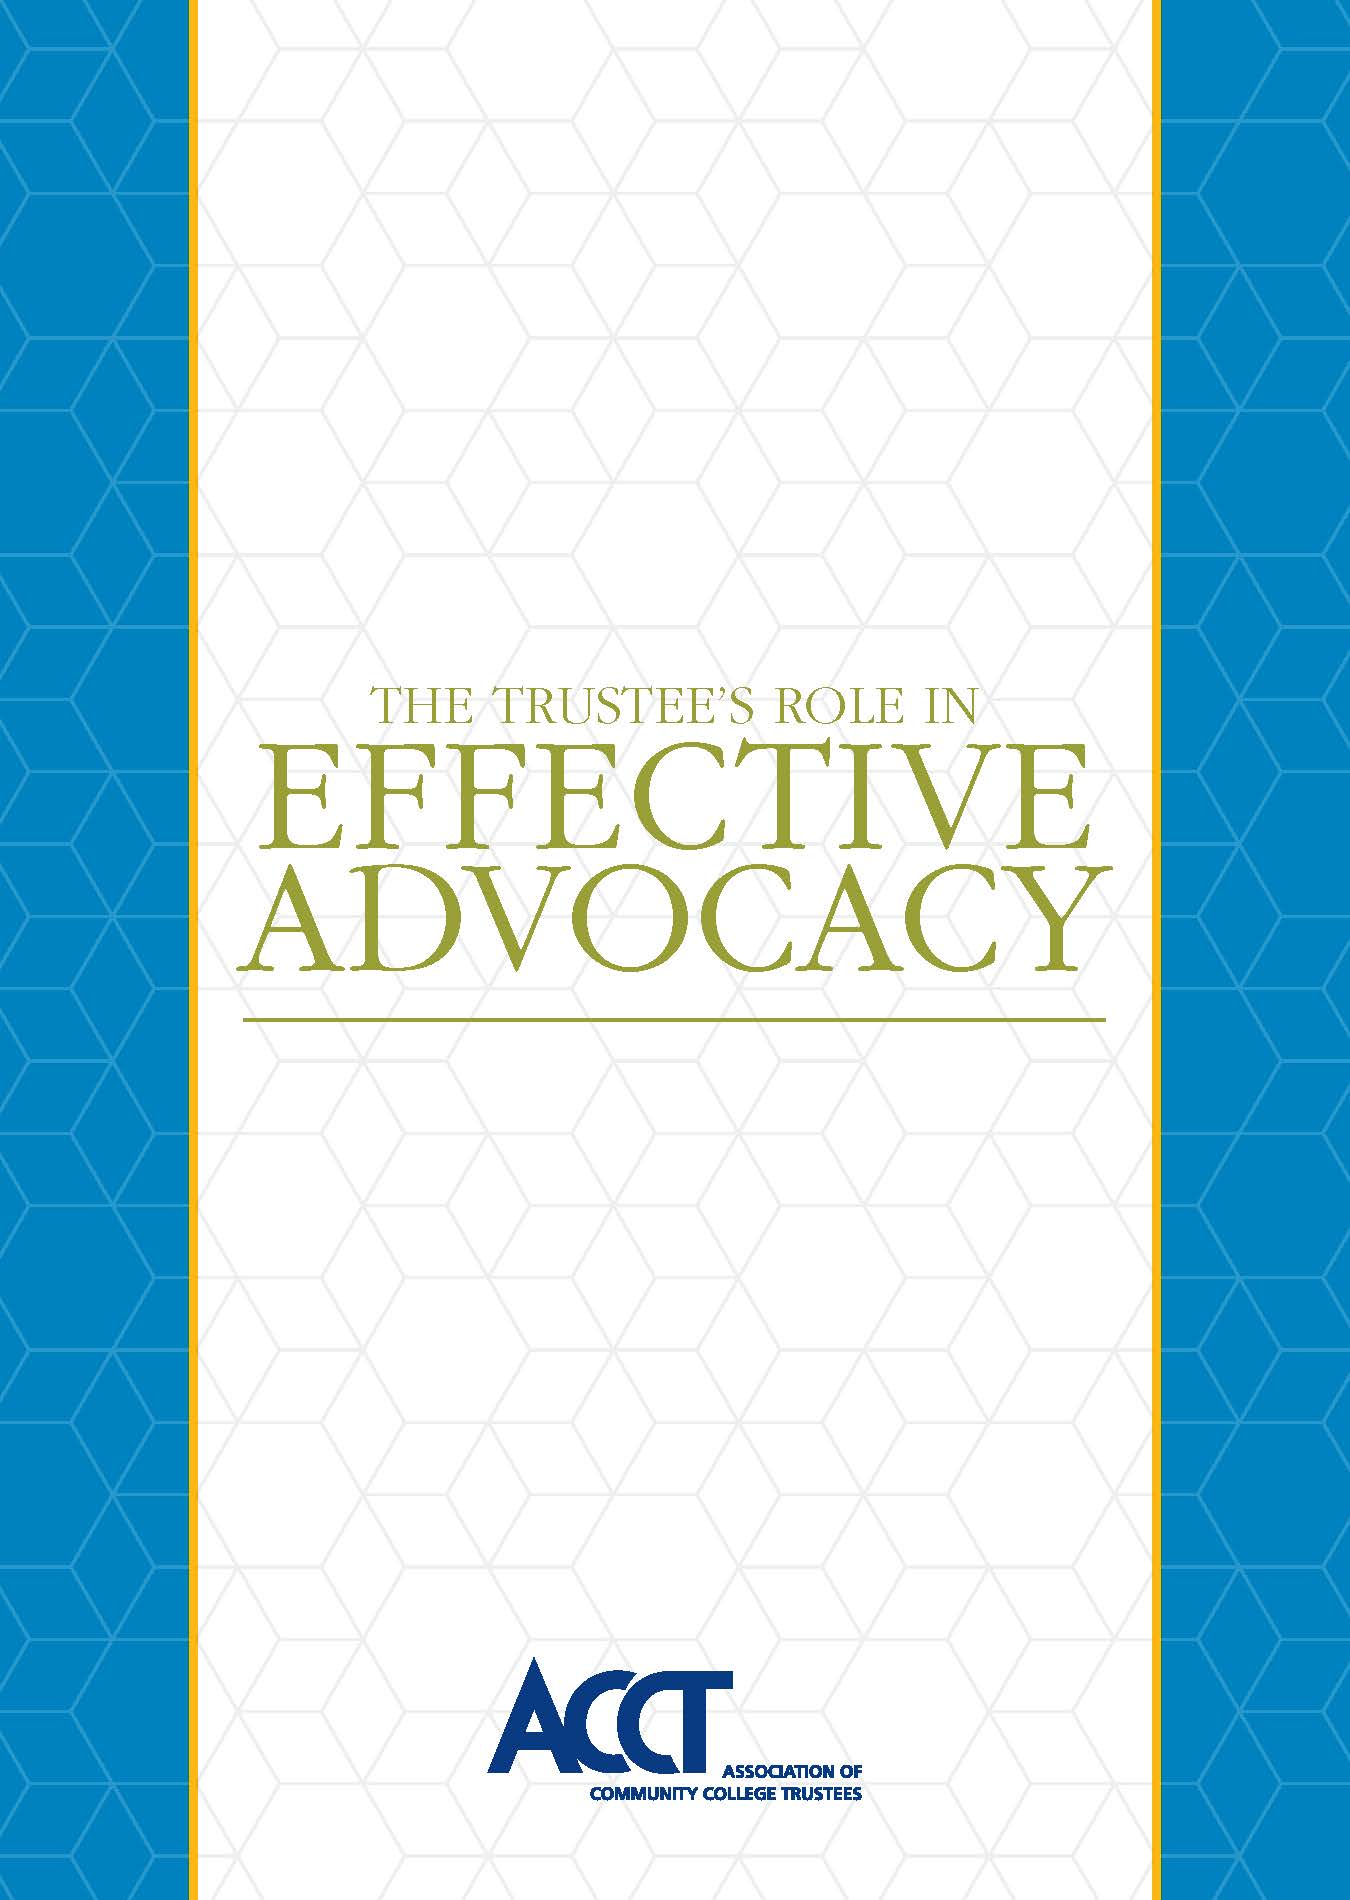 The Trustee's Role in Effective Advocacy (2019)